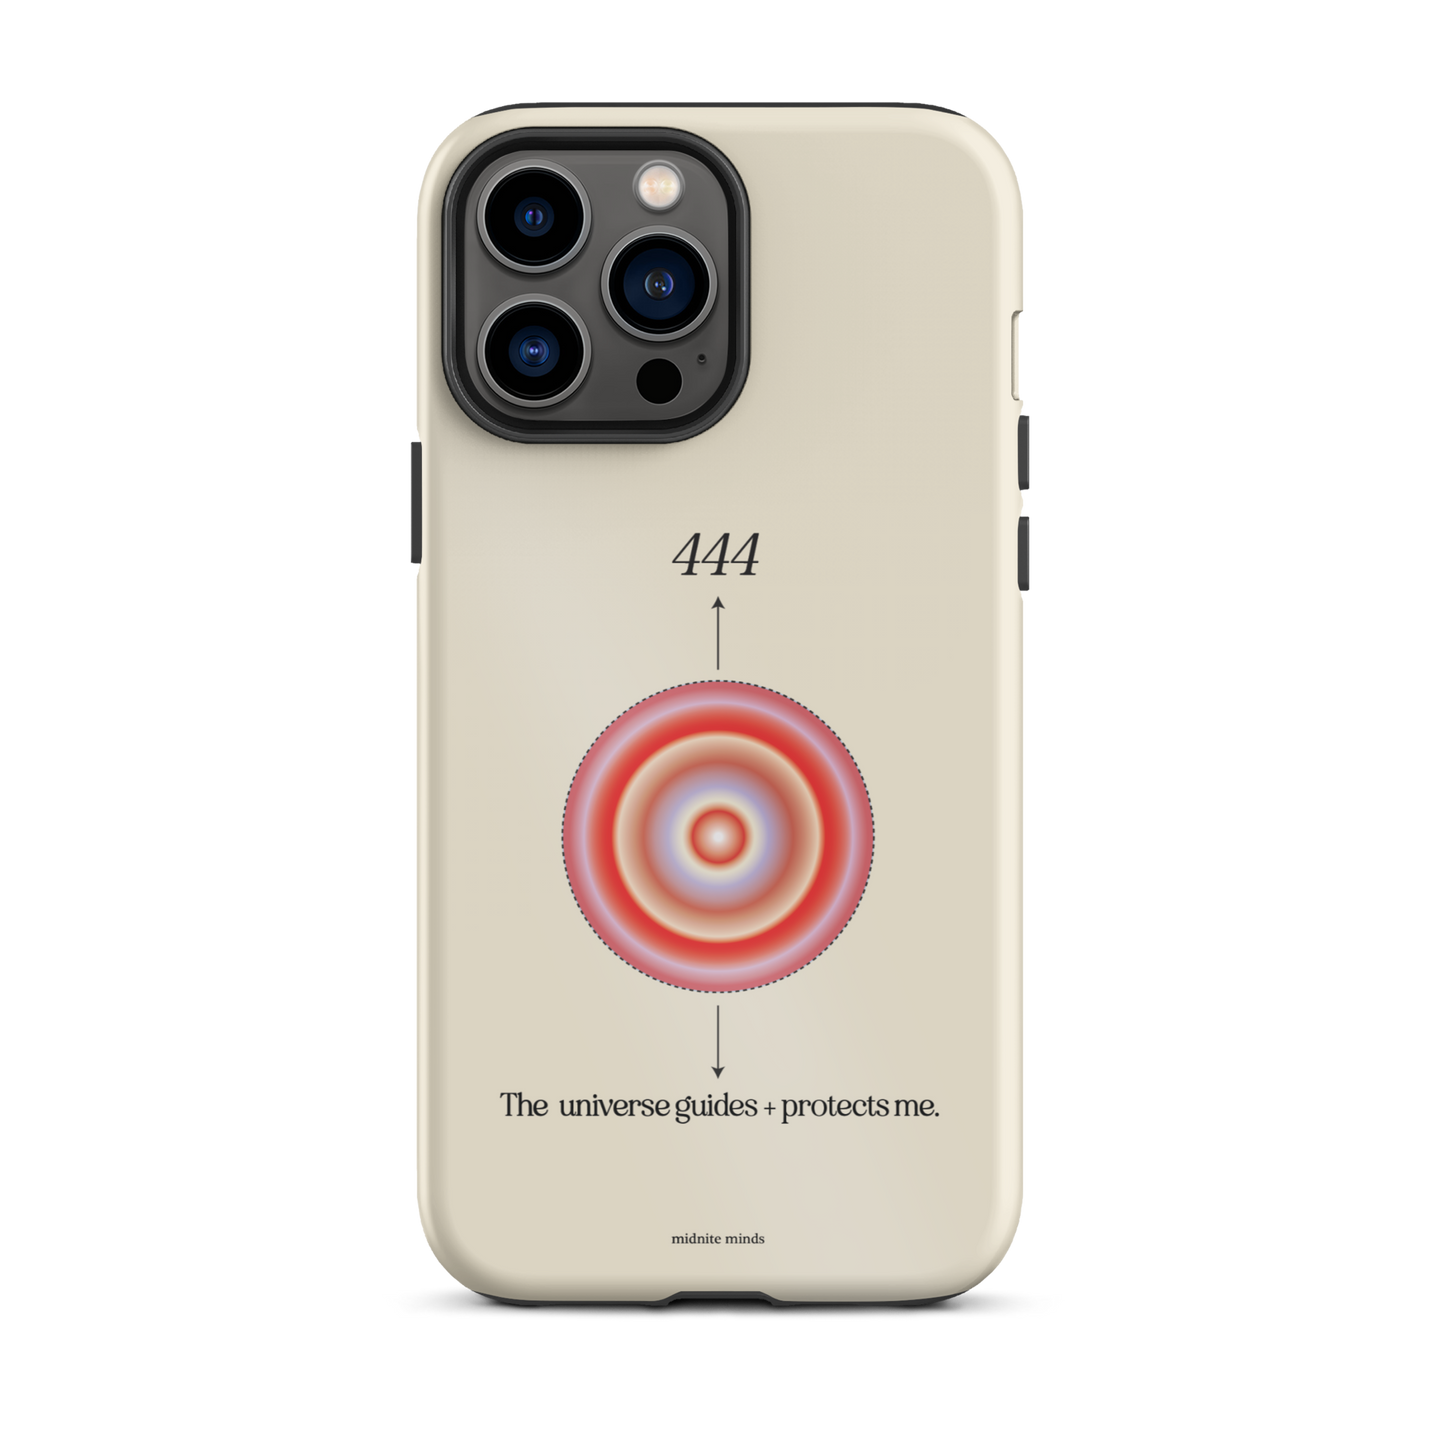 444, 444 angel number, 444 meaning, iPhone case, gradient iPhone case